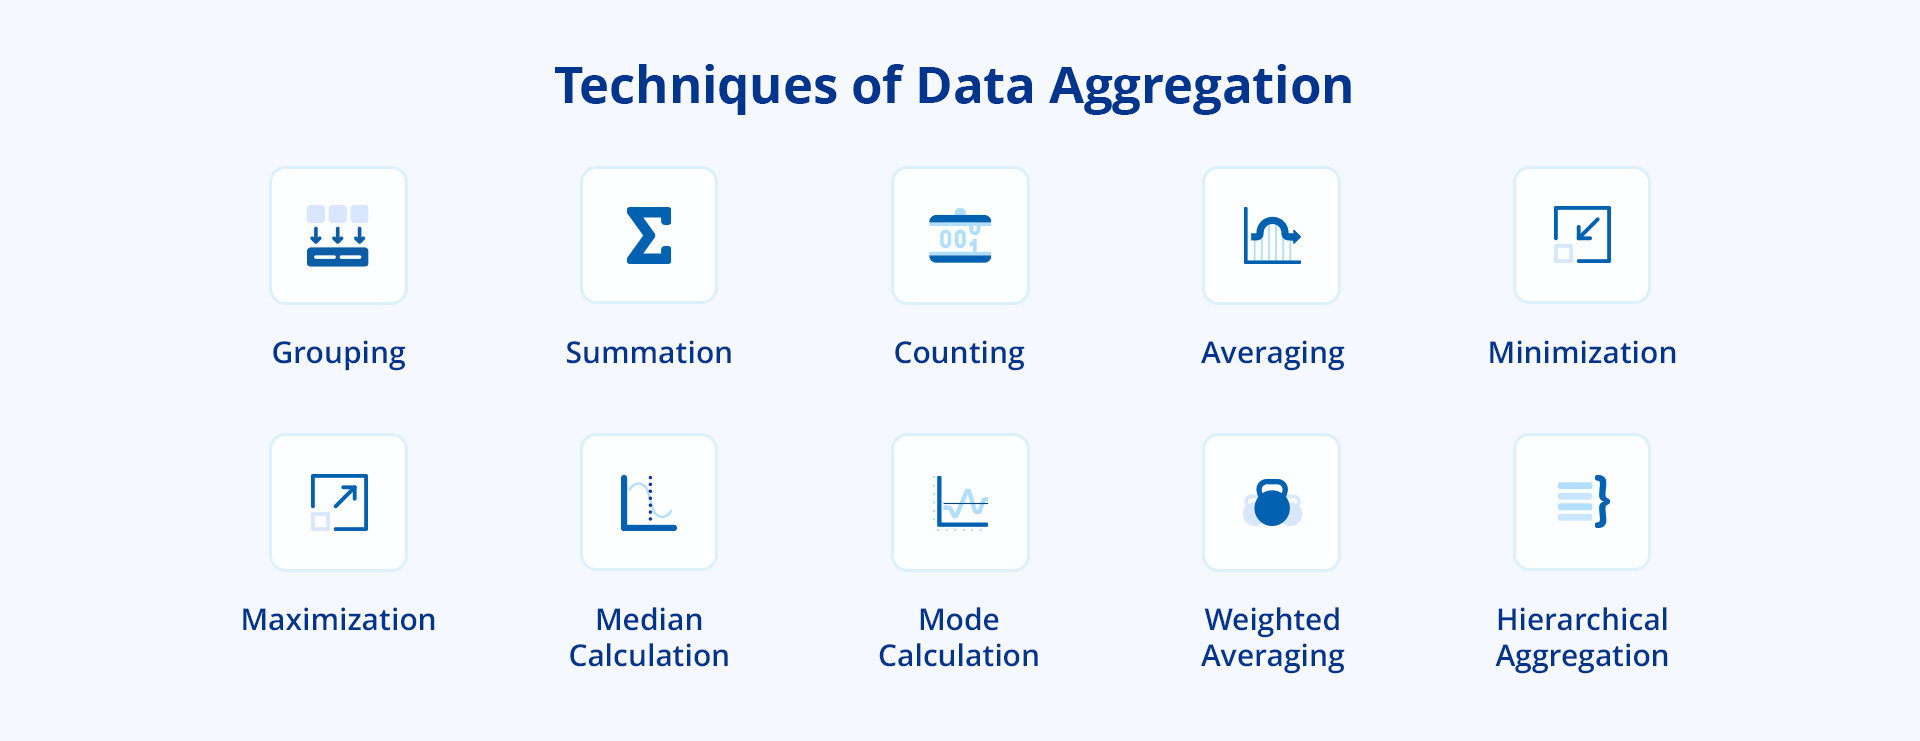 An image depicting different techniques used in data aggregation